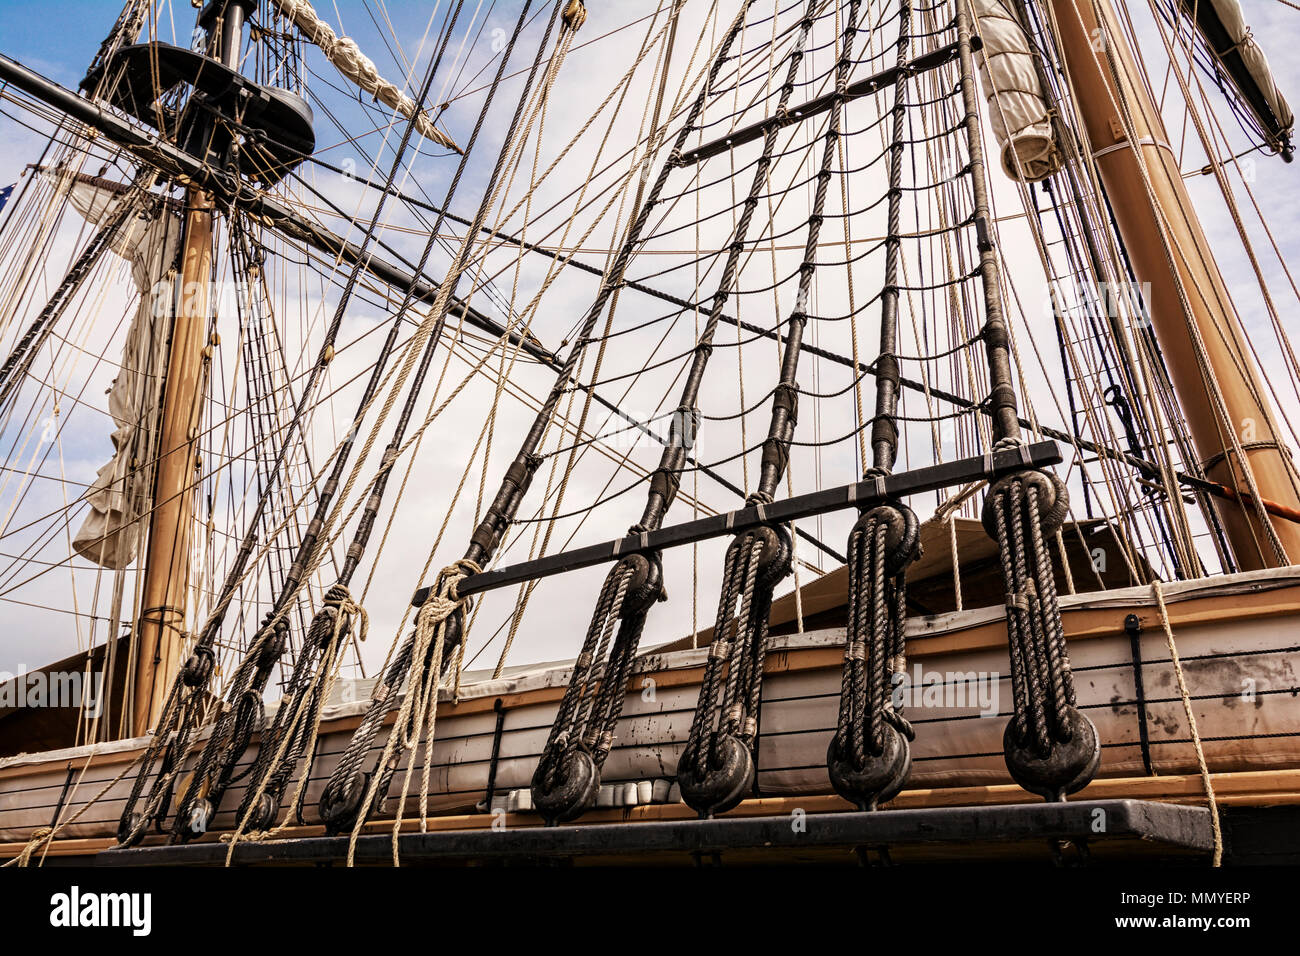 The masts and rigging of the tall ship U.S. Brig Niagara against a blue, cloud filled sky. Stock Photo